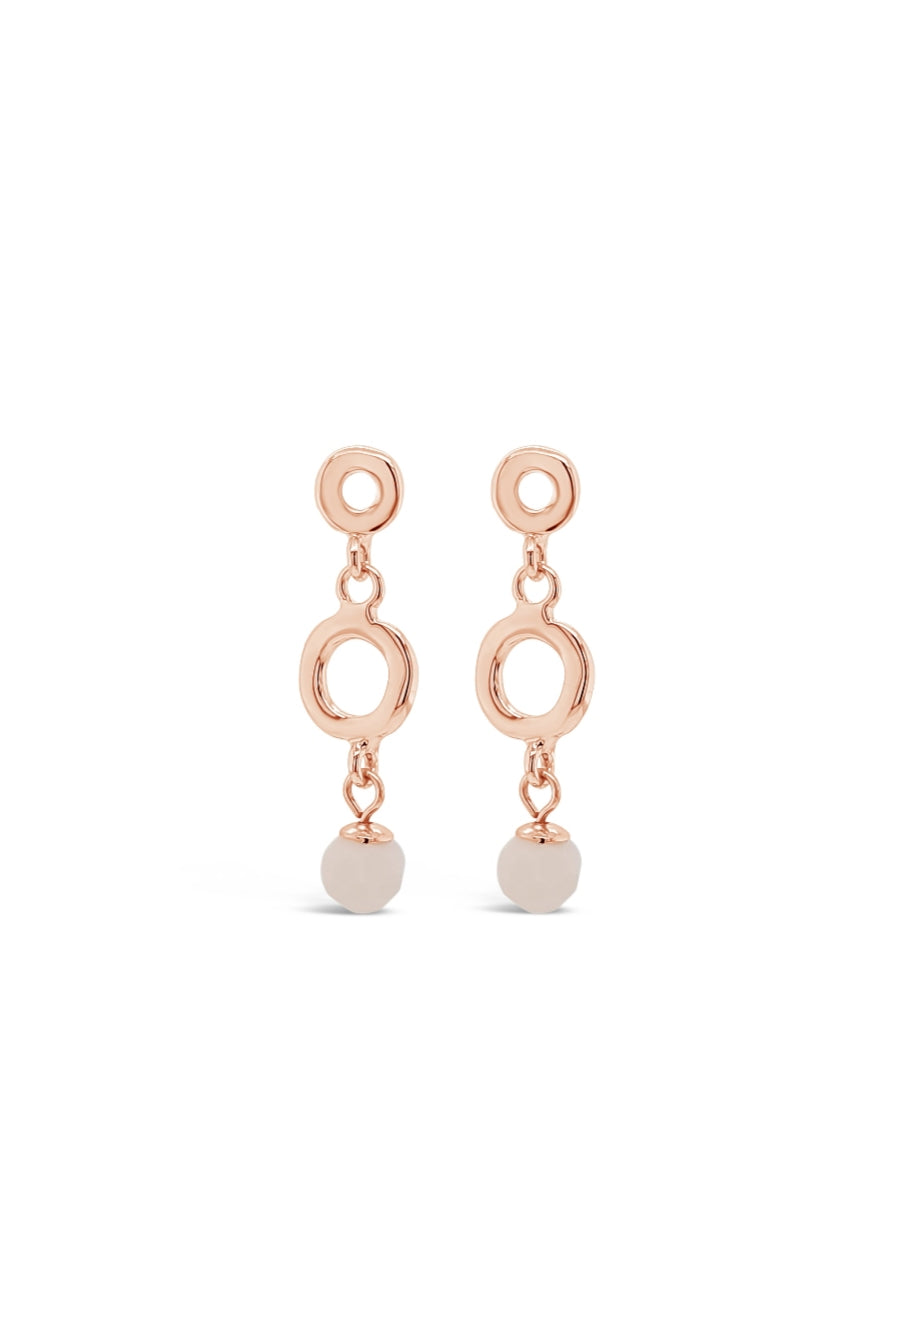 Rose Gold Plated Circle Drop Earrings